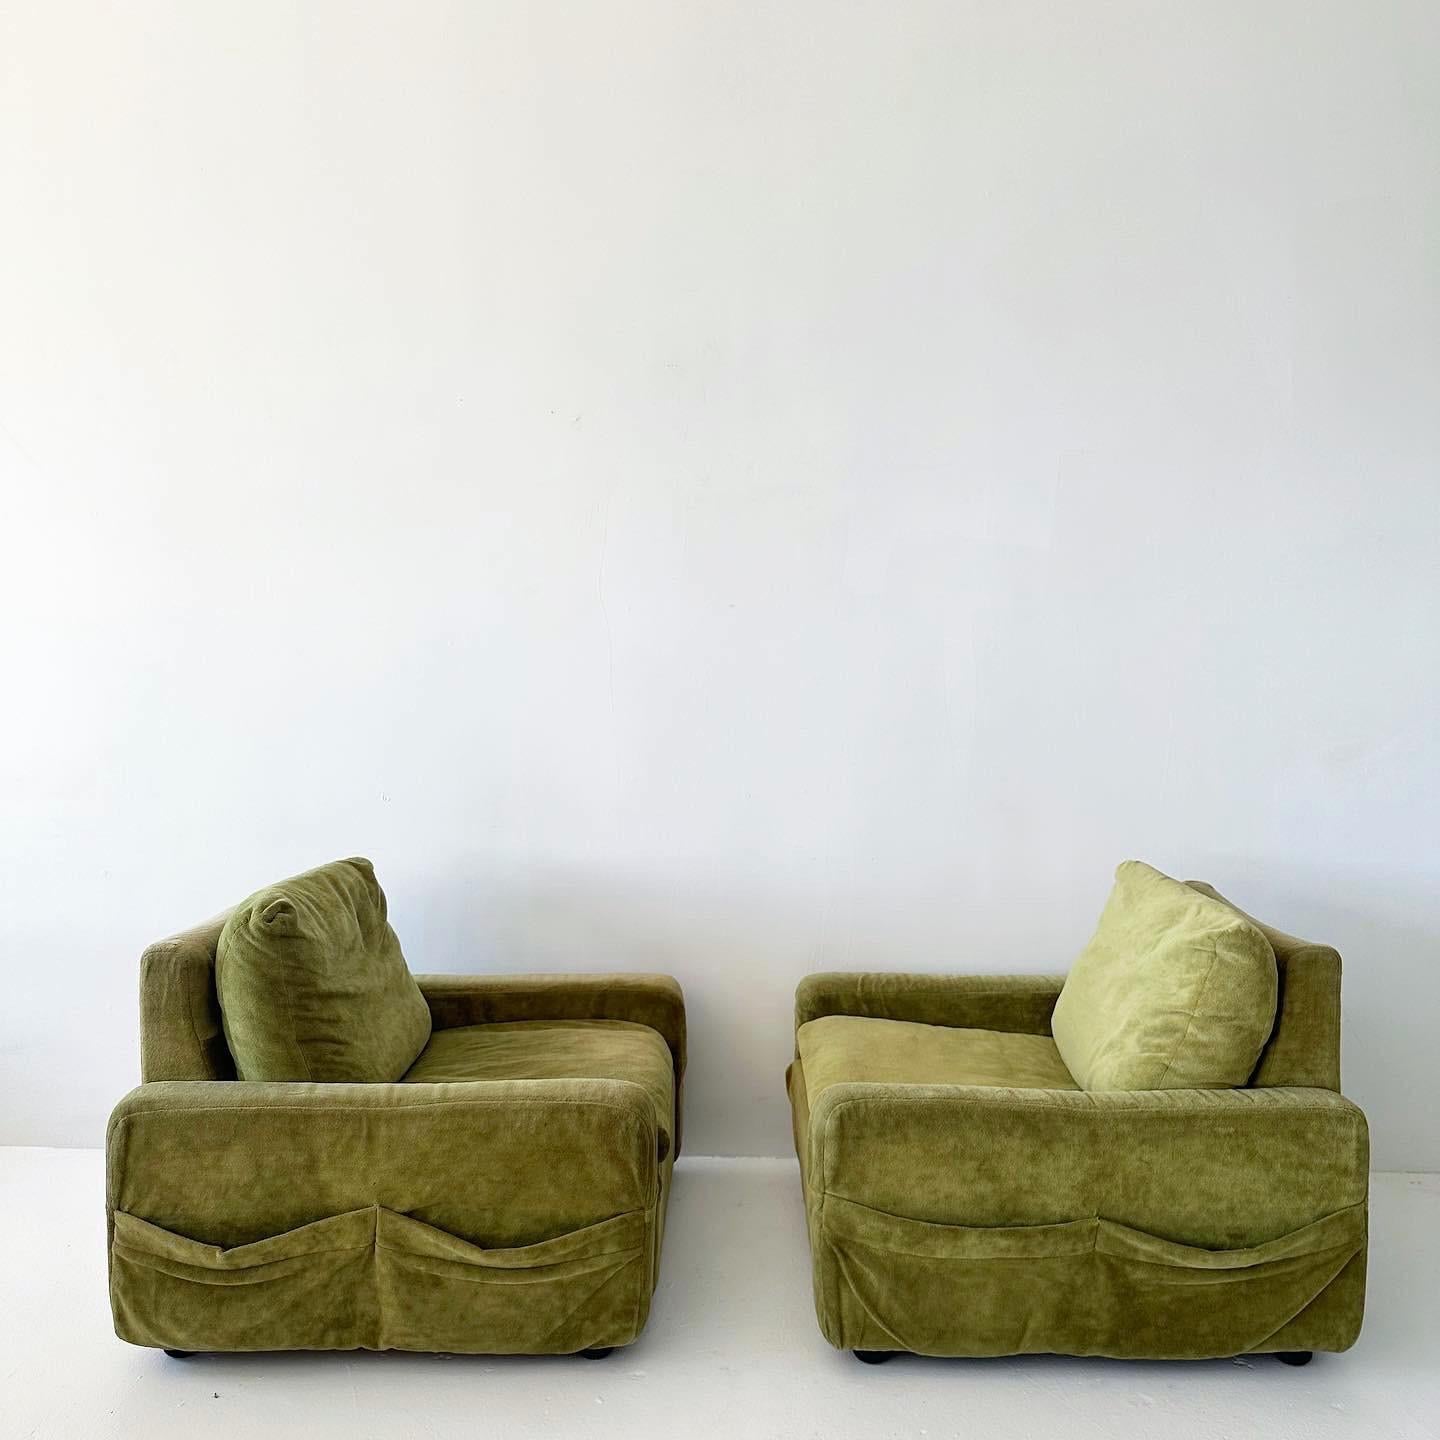 American 1970s vintage green velvet knoll club chair (2 available) For Sale